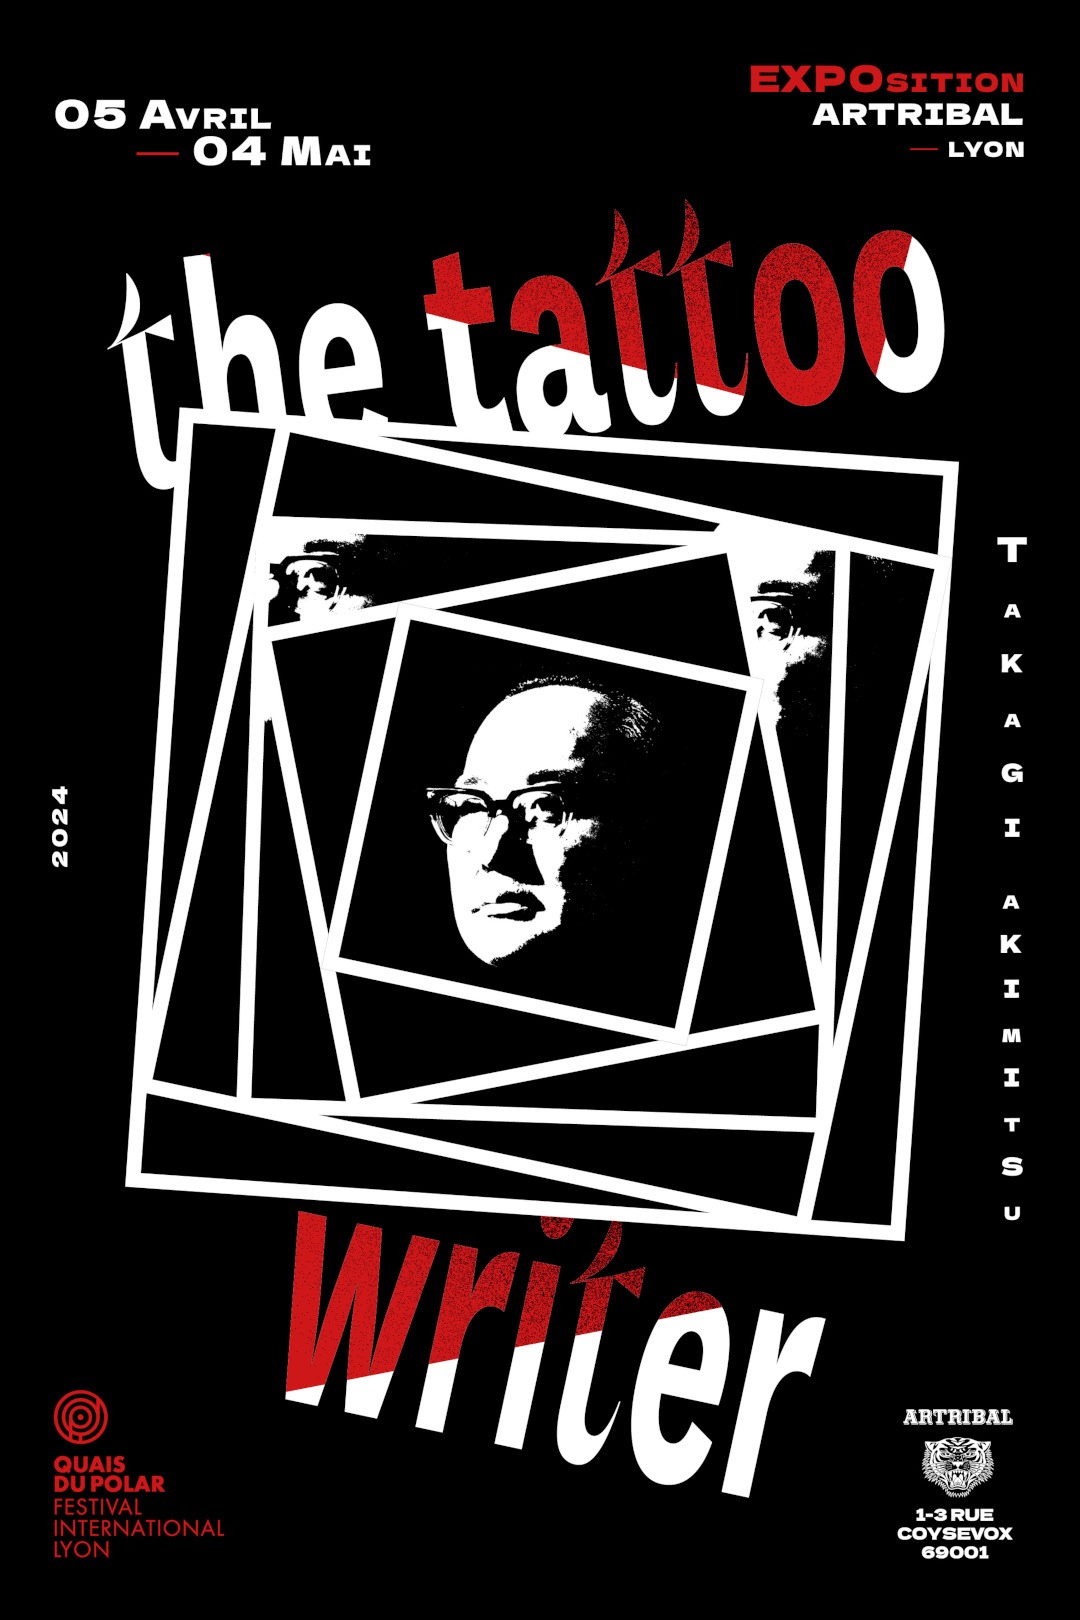 Poster for the photographic exhibition "The Tattoo Writer" during Quais du Polar, to mark the 20th anniversary of the Lyon International Thriller Festival.